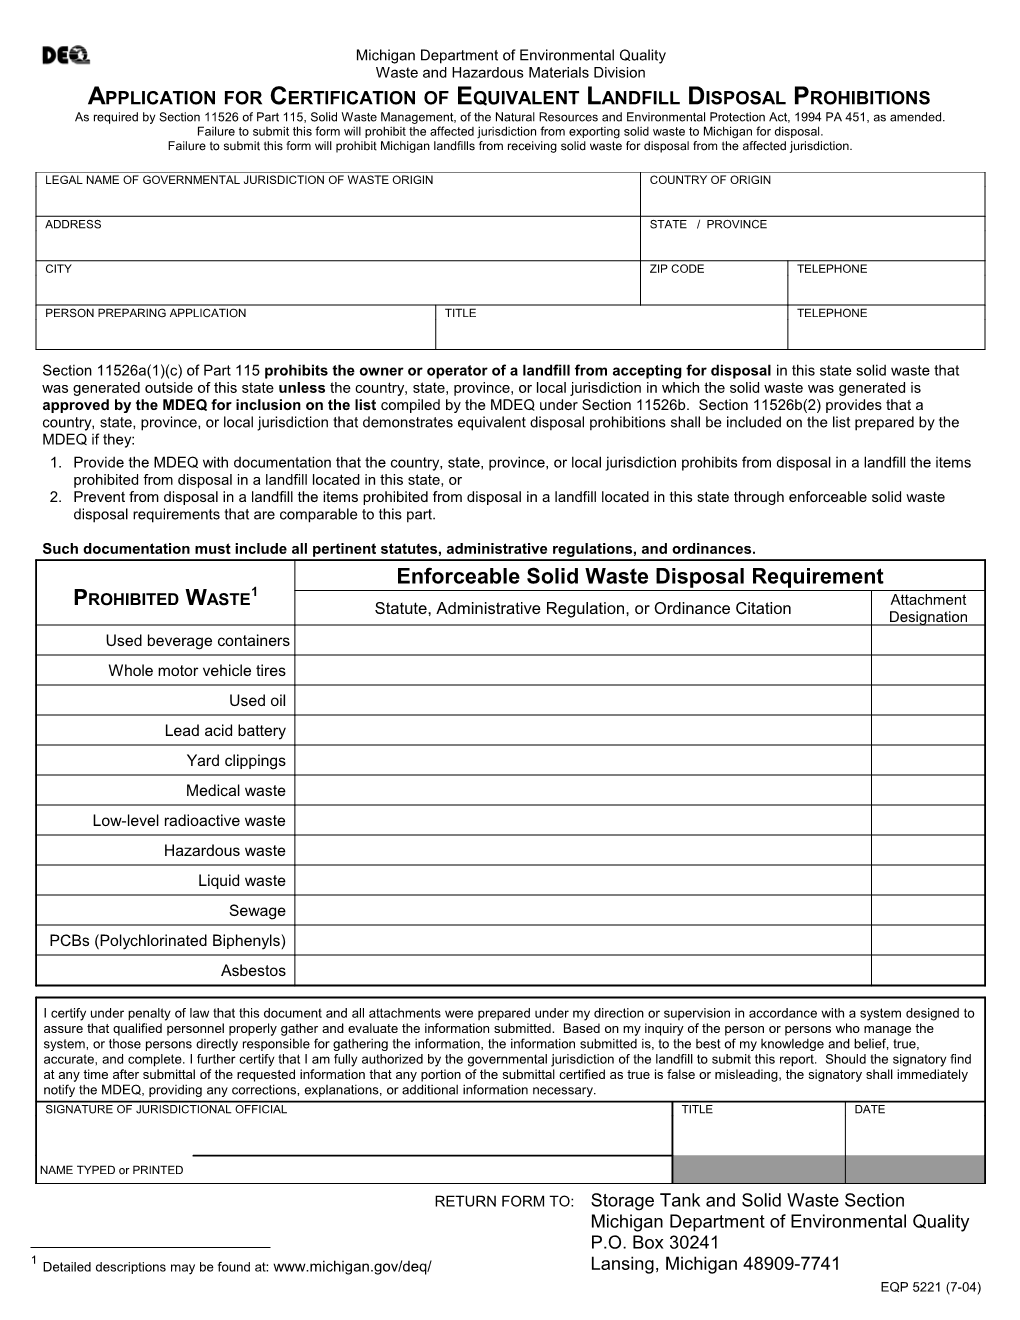 Application for Certification of Equivalent Landfill Disposal Prohibitions